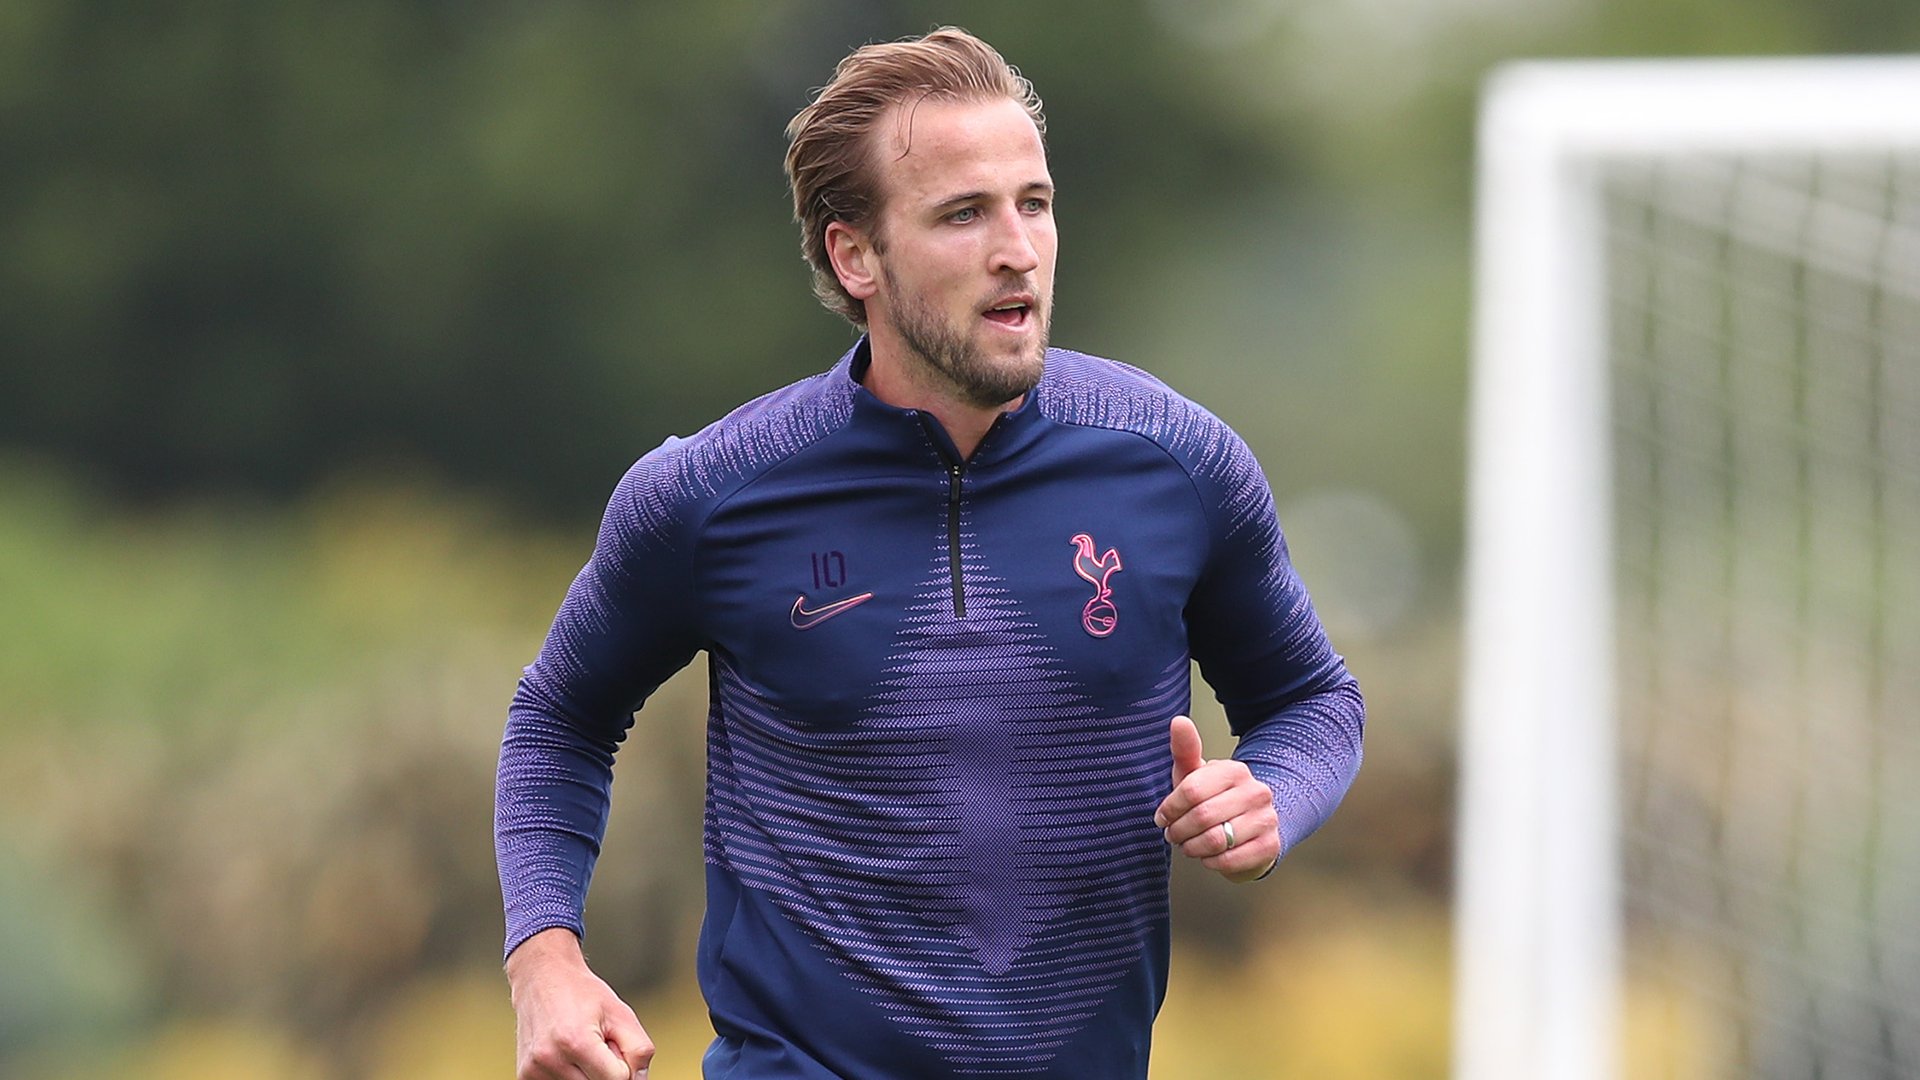 Harry Kane will be hoping to get some valuable match practice